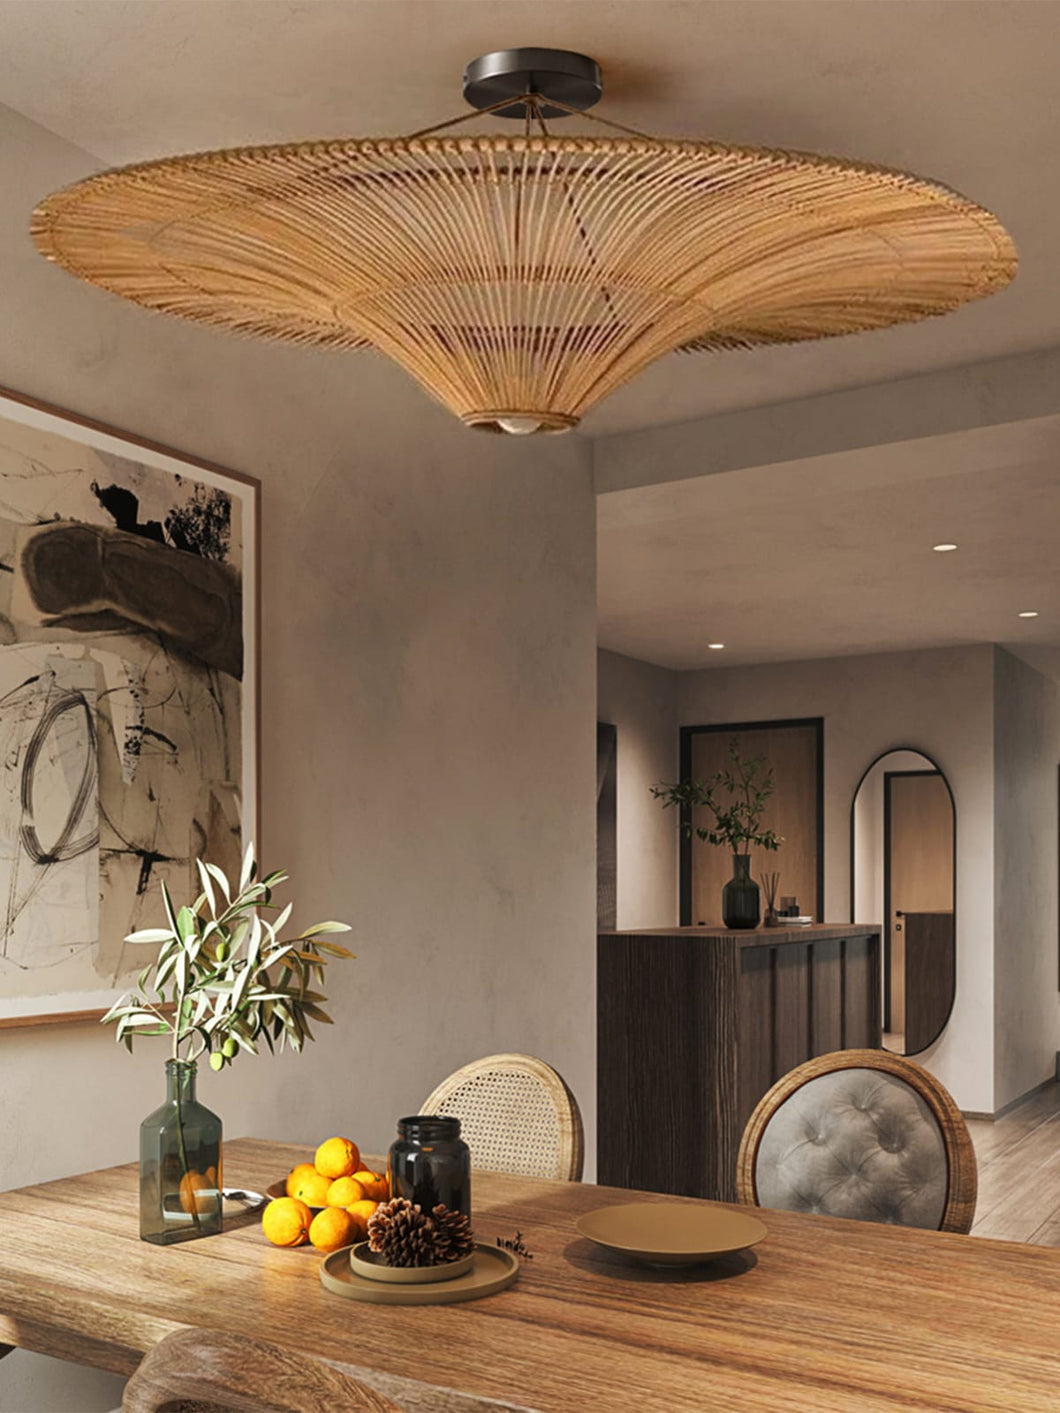 Aura-Unique handmade Woven Hanging Pendant Light, Natural/Cane Pendant Light for Home restaurants and offices.